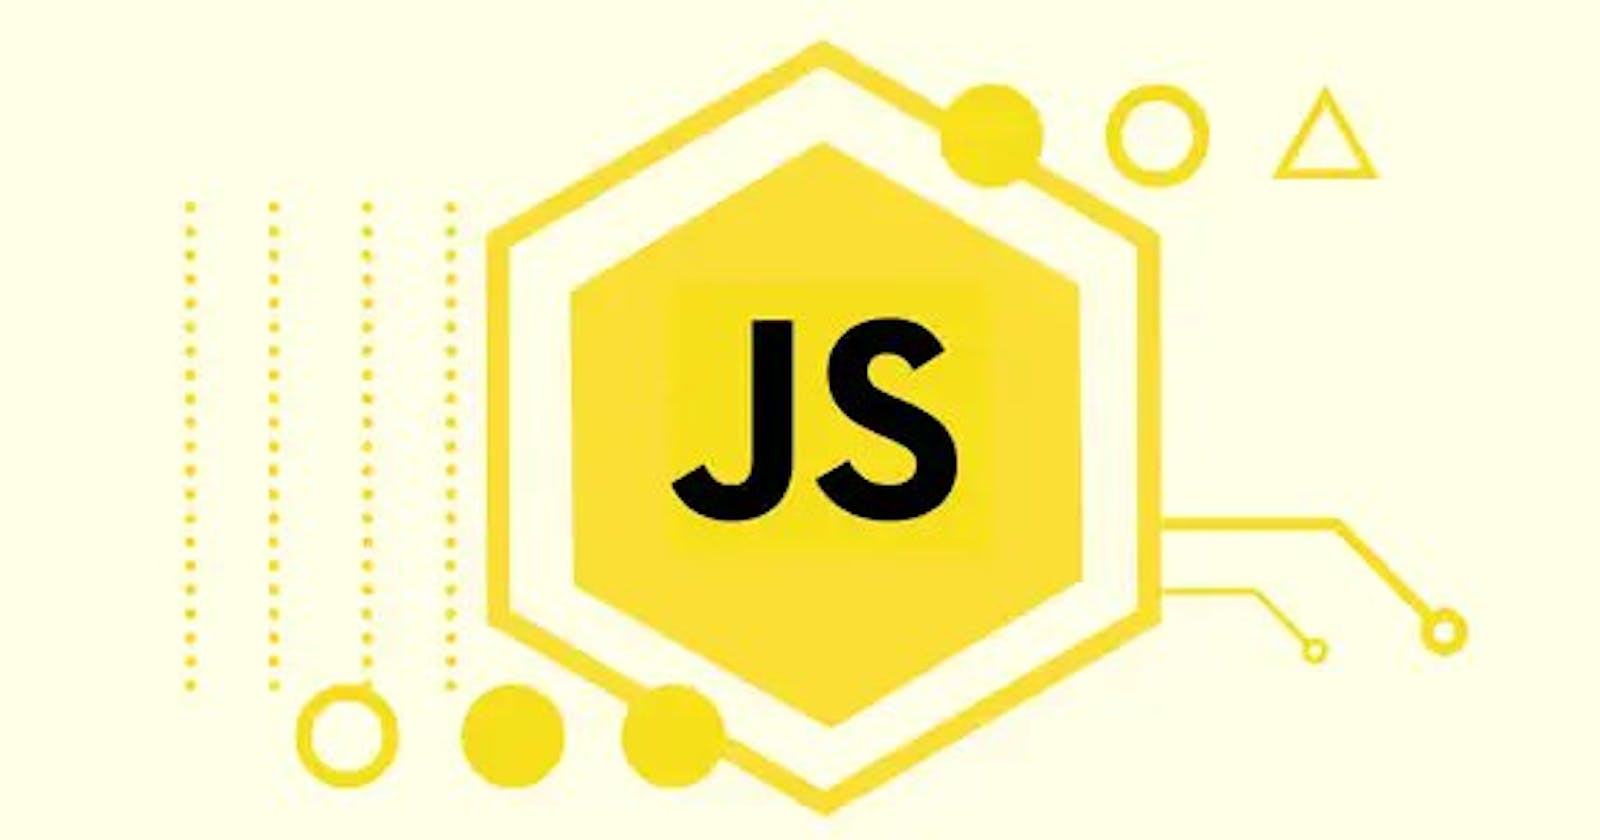 How to Understand Javascript Easily